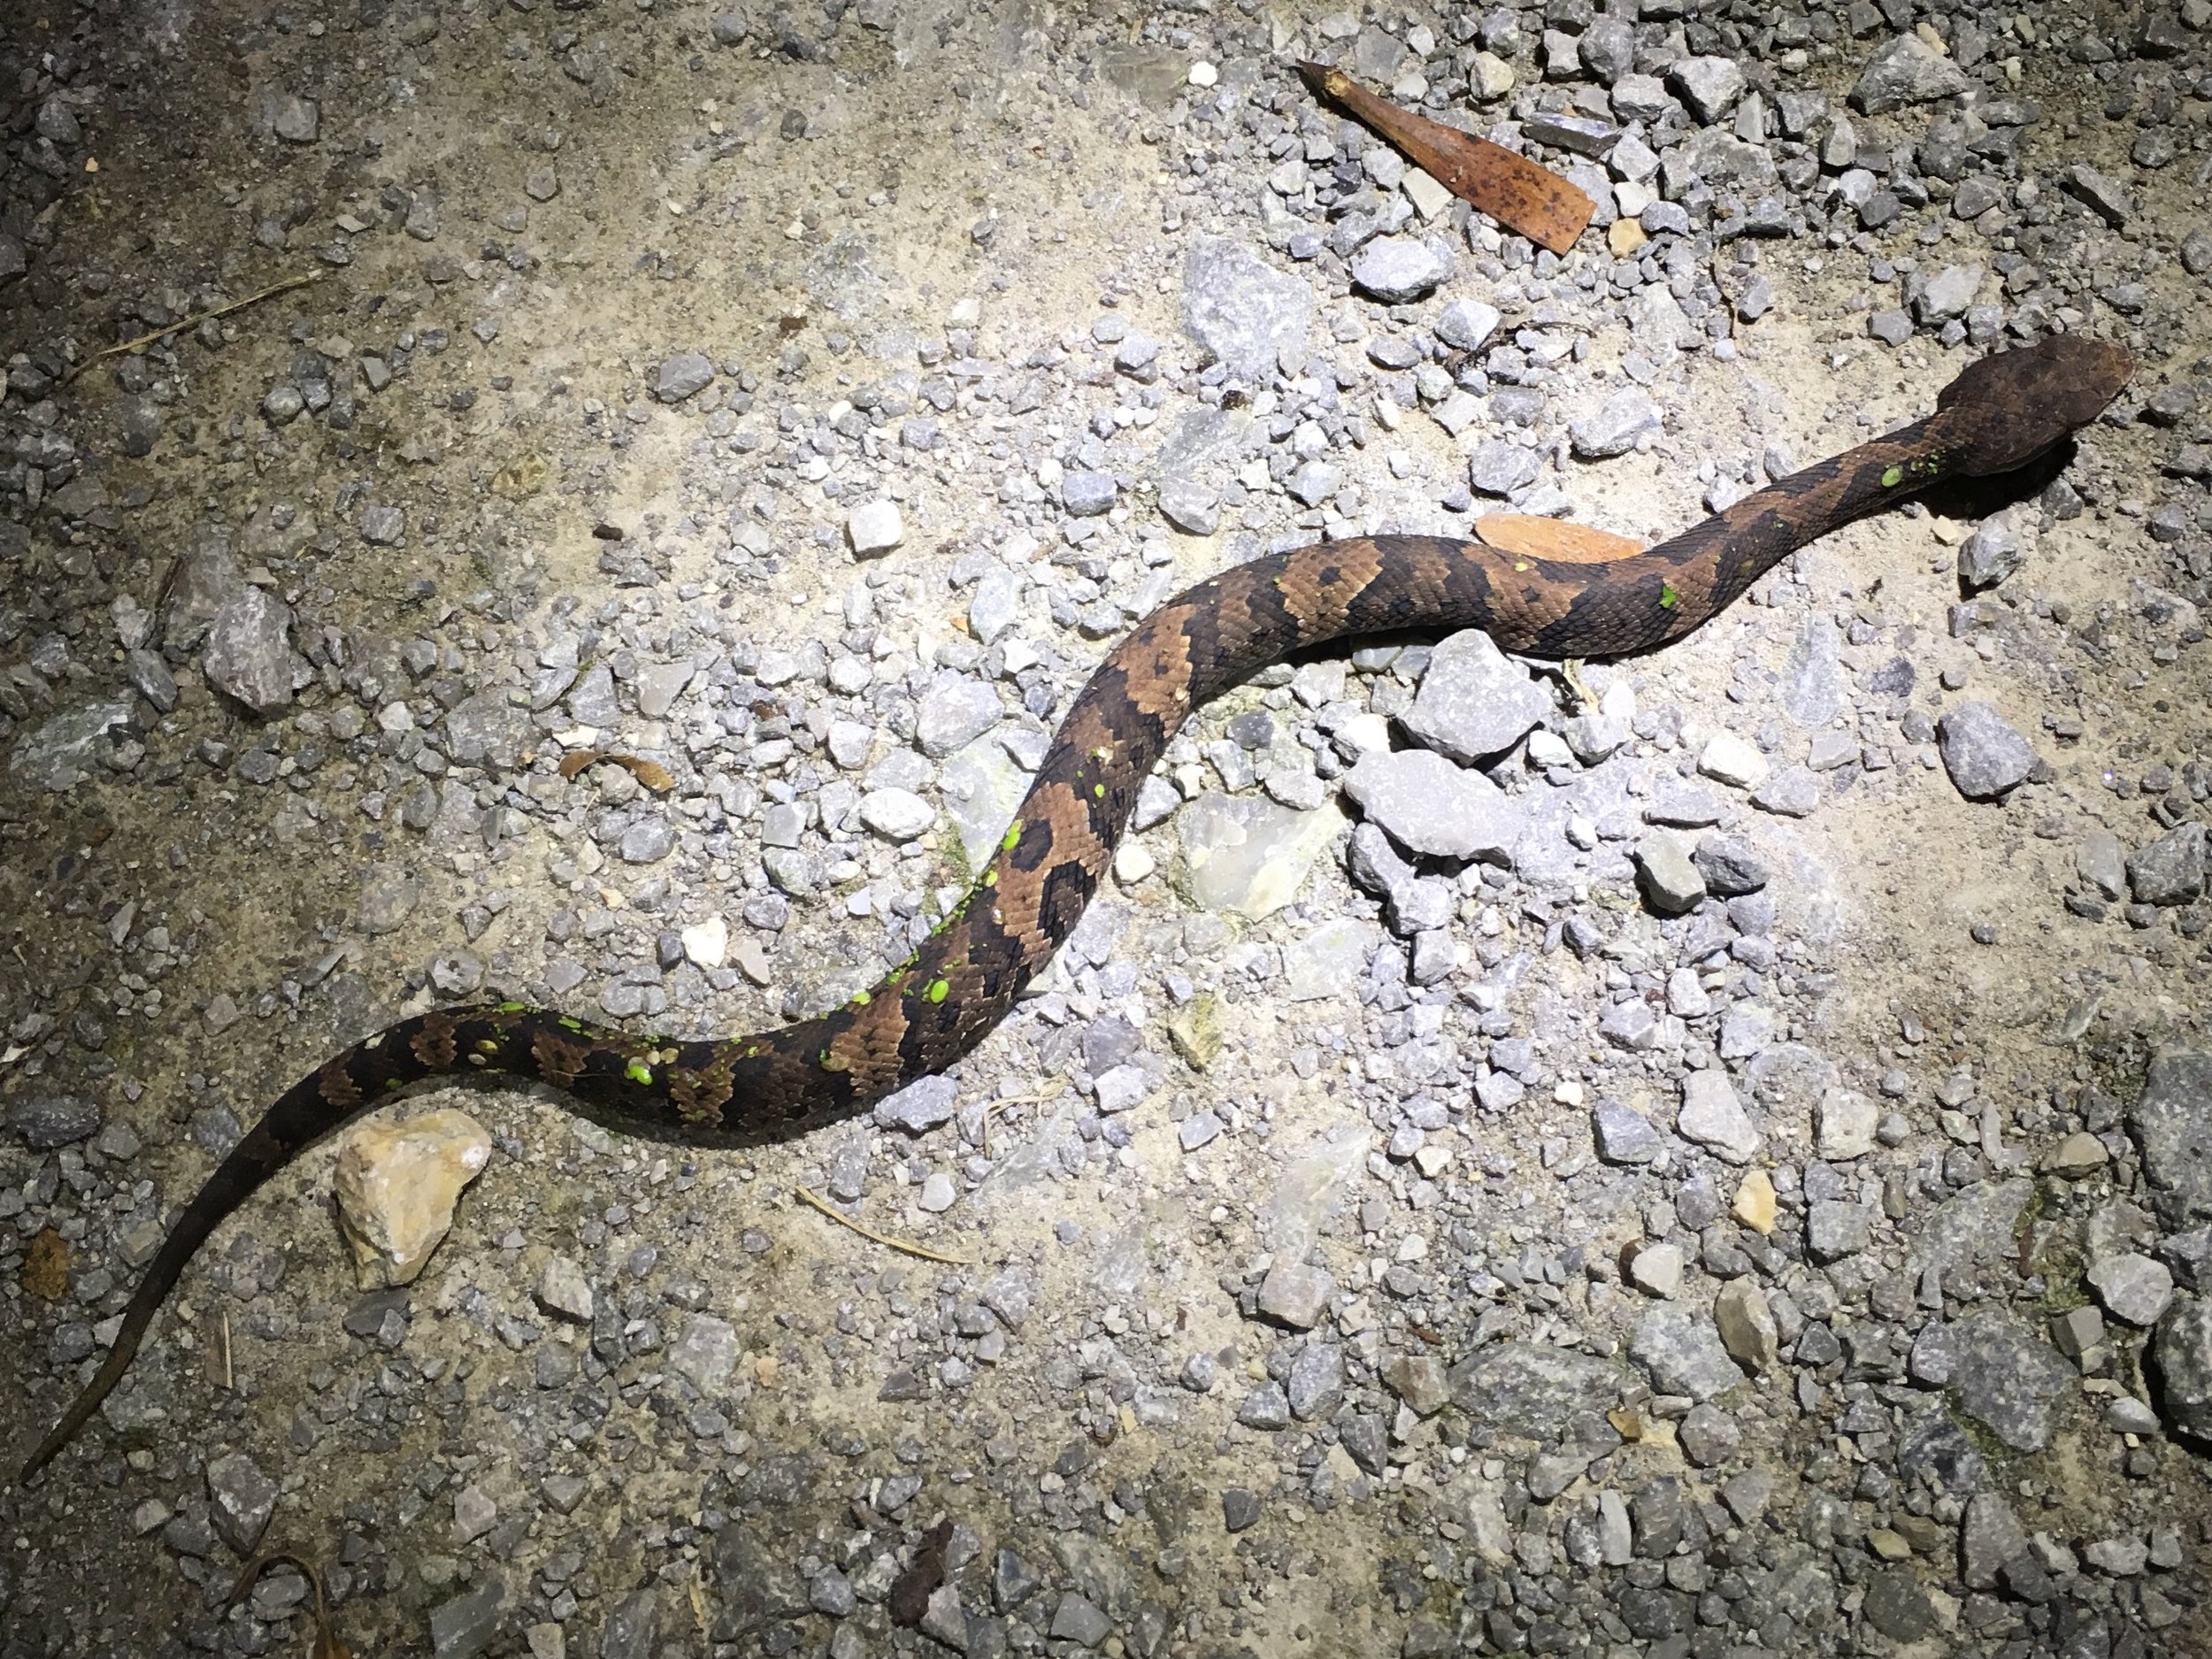 Juvenile cottonmouth on the move after dark